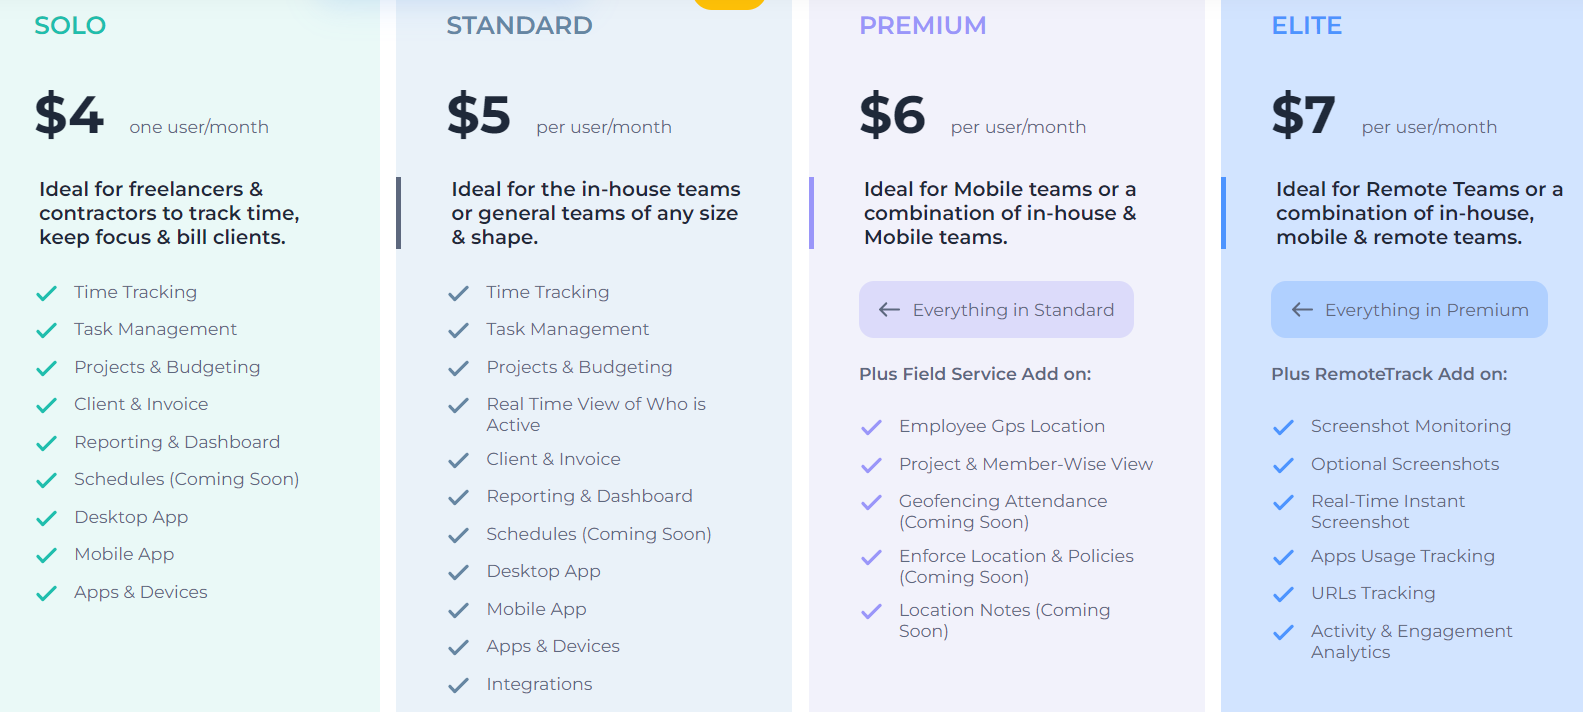 Pricing page showing 4 different price plans, starting from $4 to $7